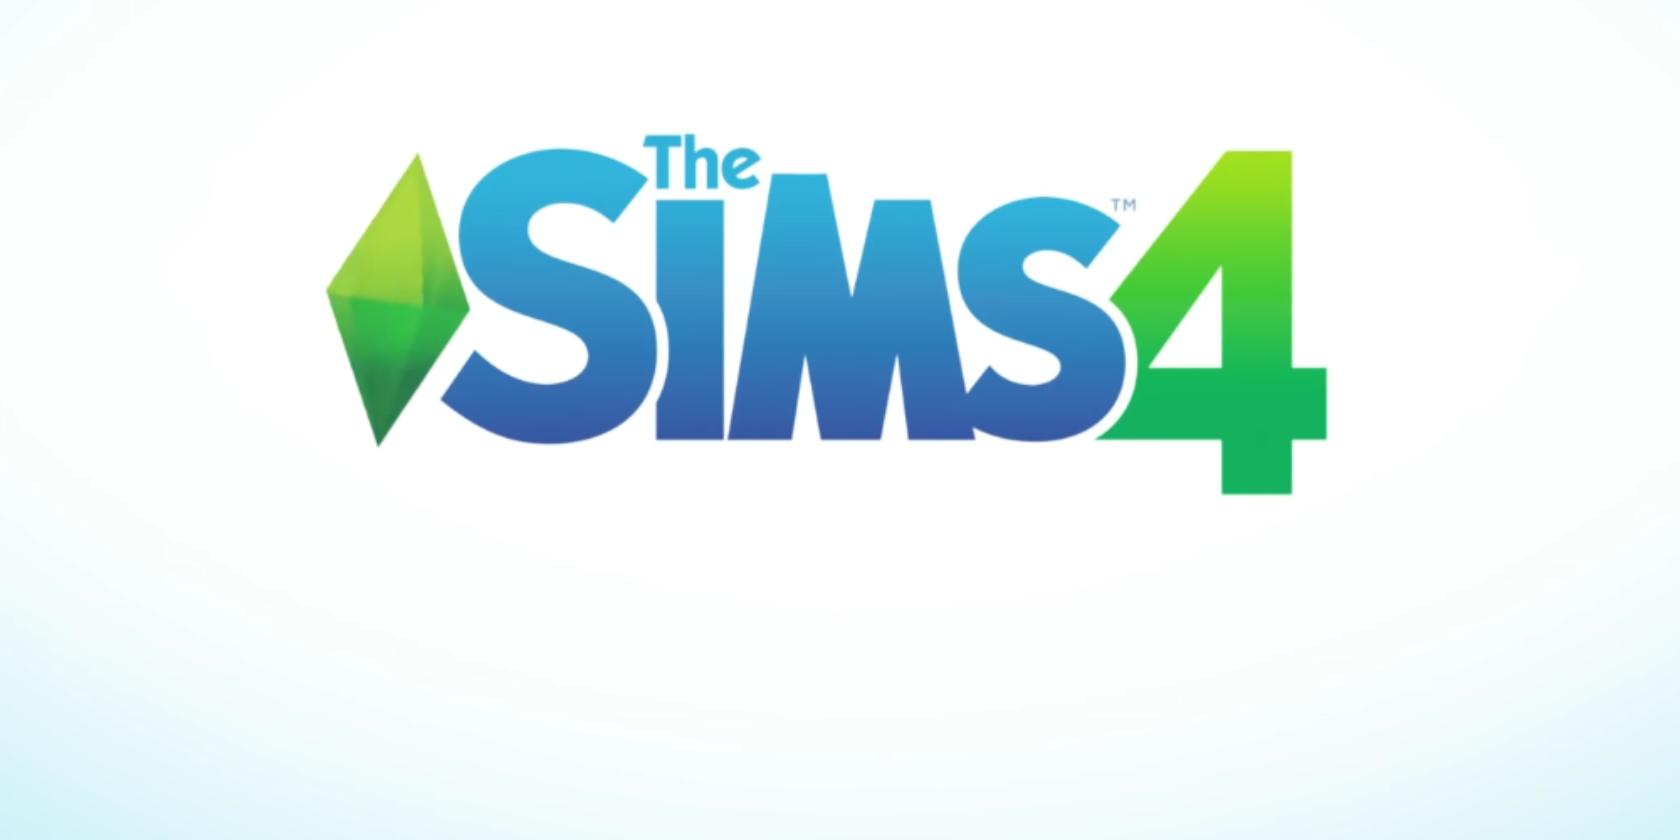 For a limited time, 'The Sims 4' is free to download on Windows